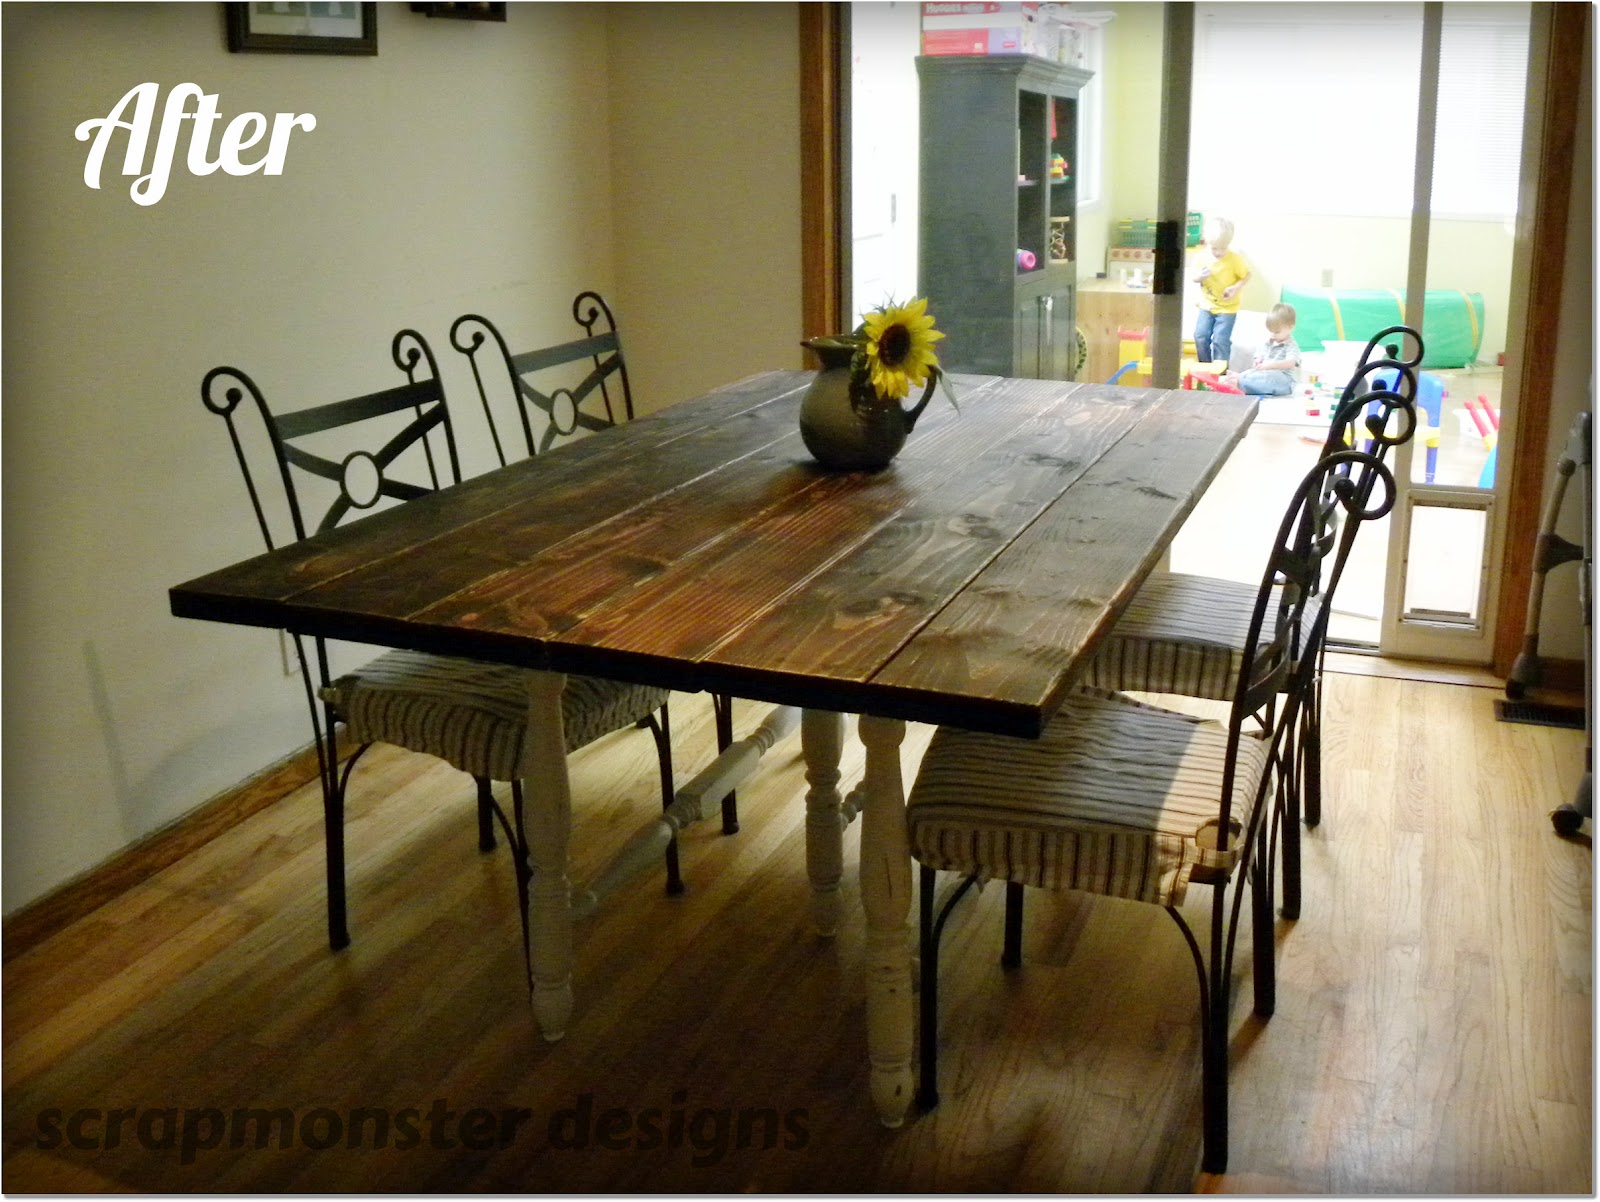 Scrapmonster Rustic Dining Table Make Over